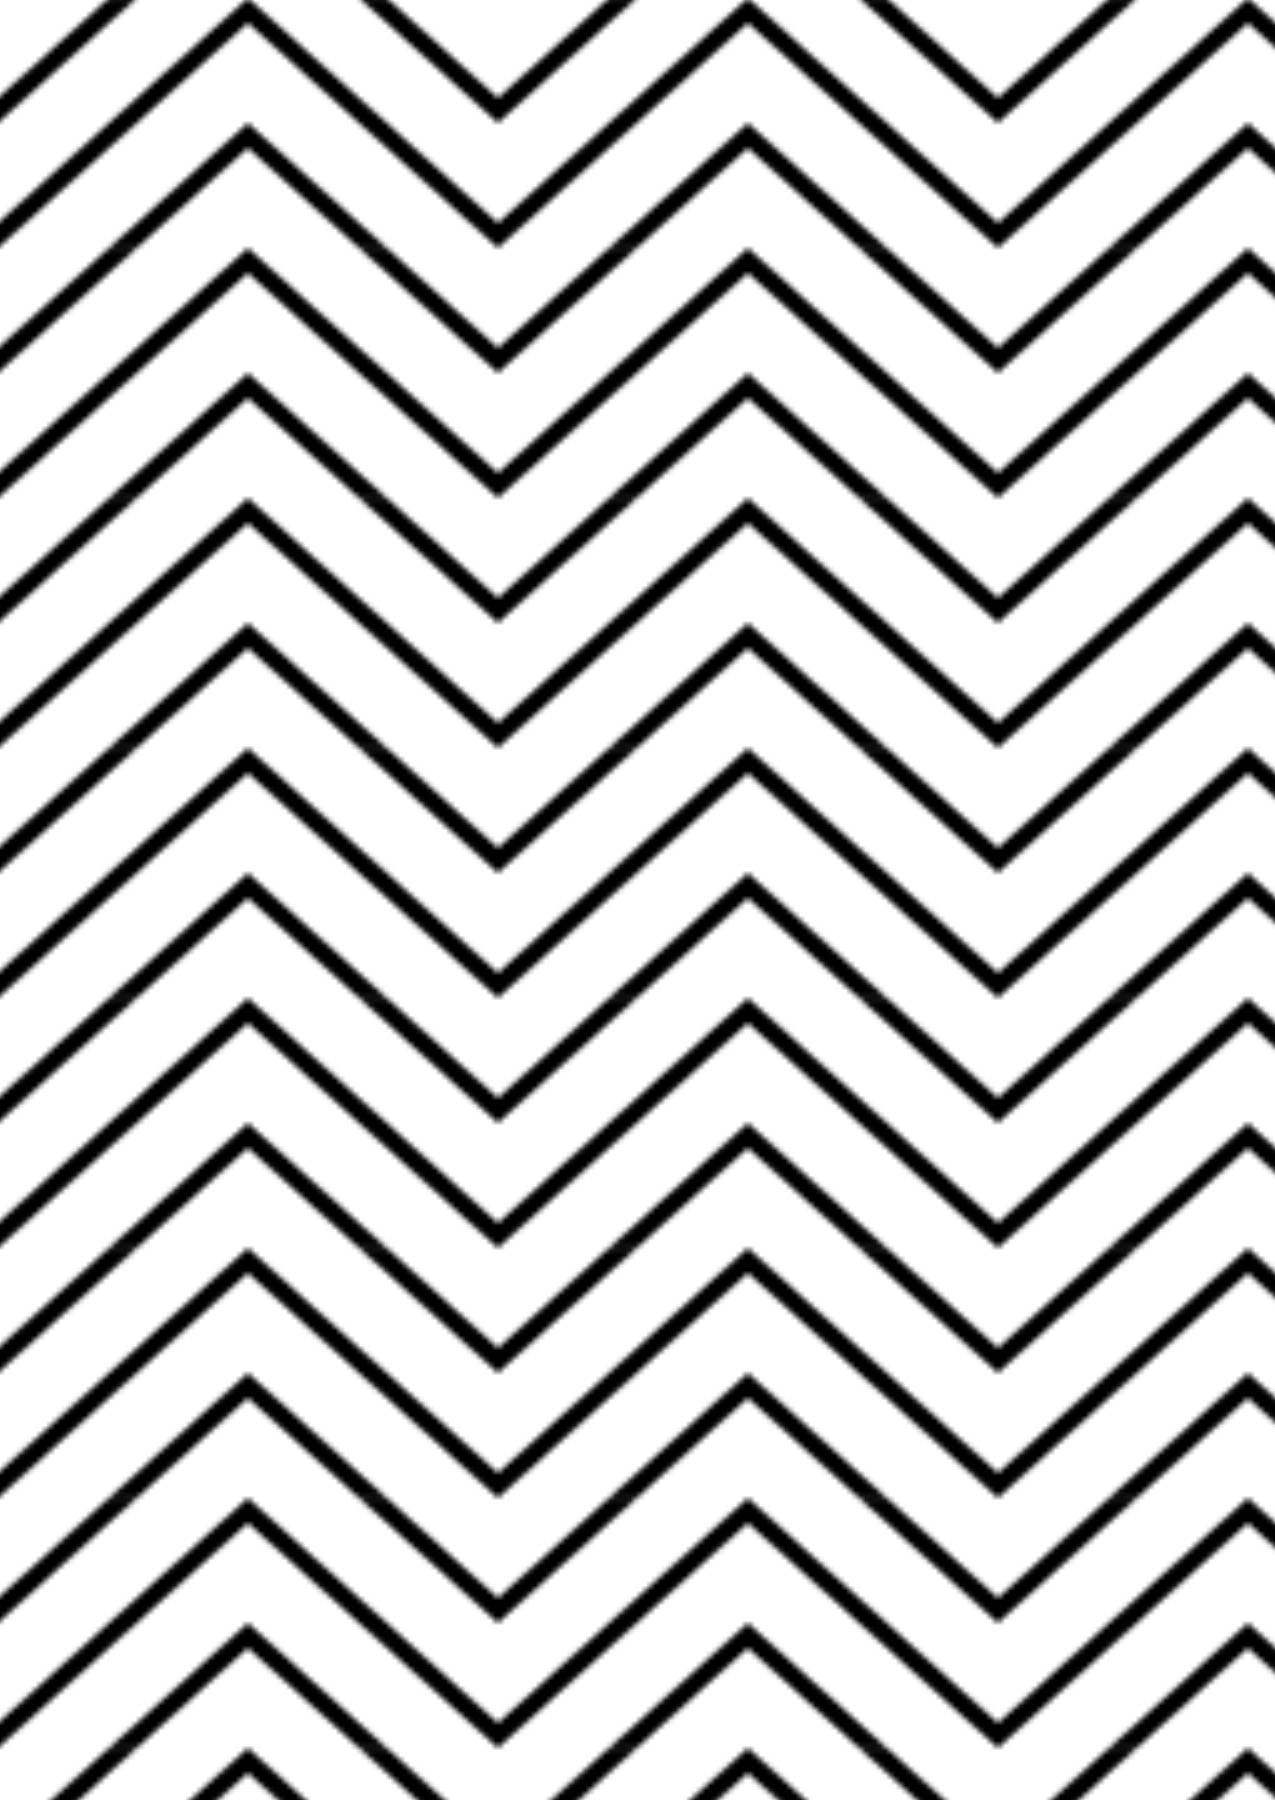 By Mycnlz Zigzag Blauw Gtl Black And White Rug Previous Next